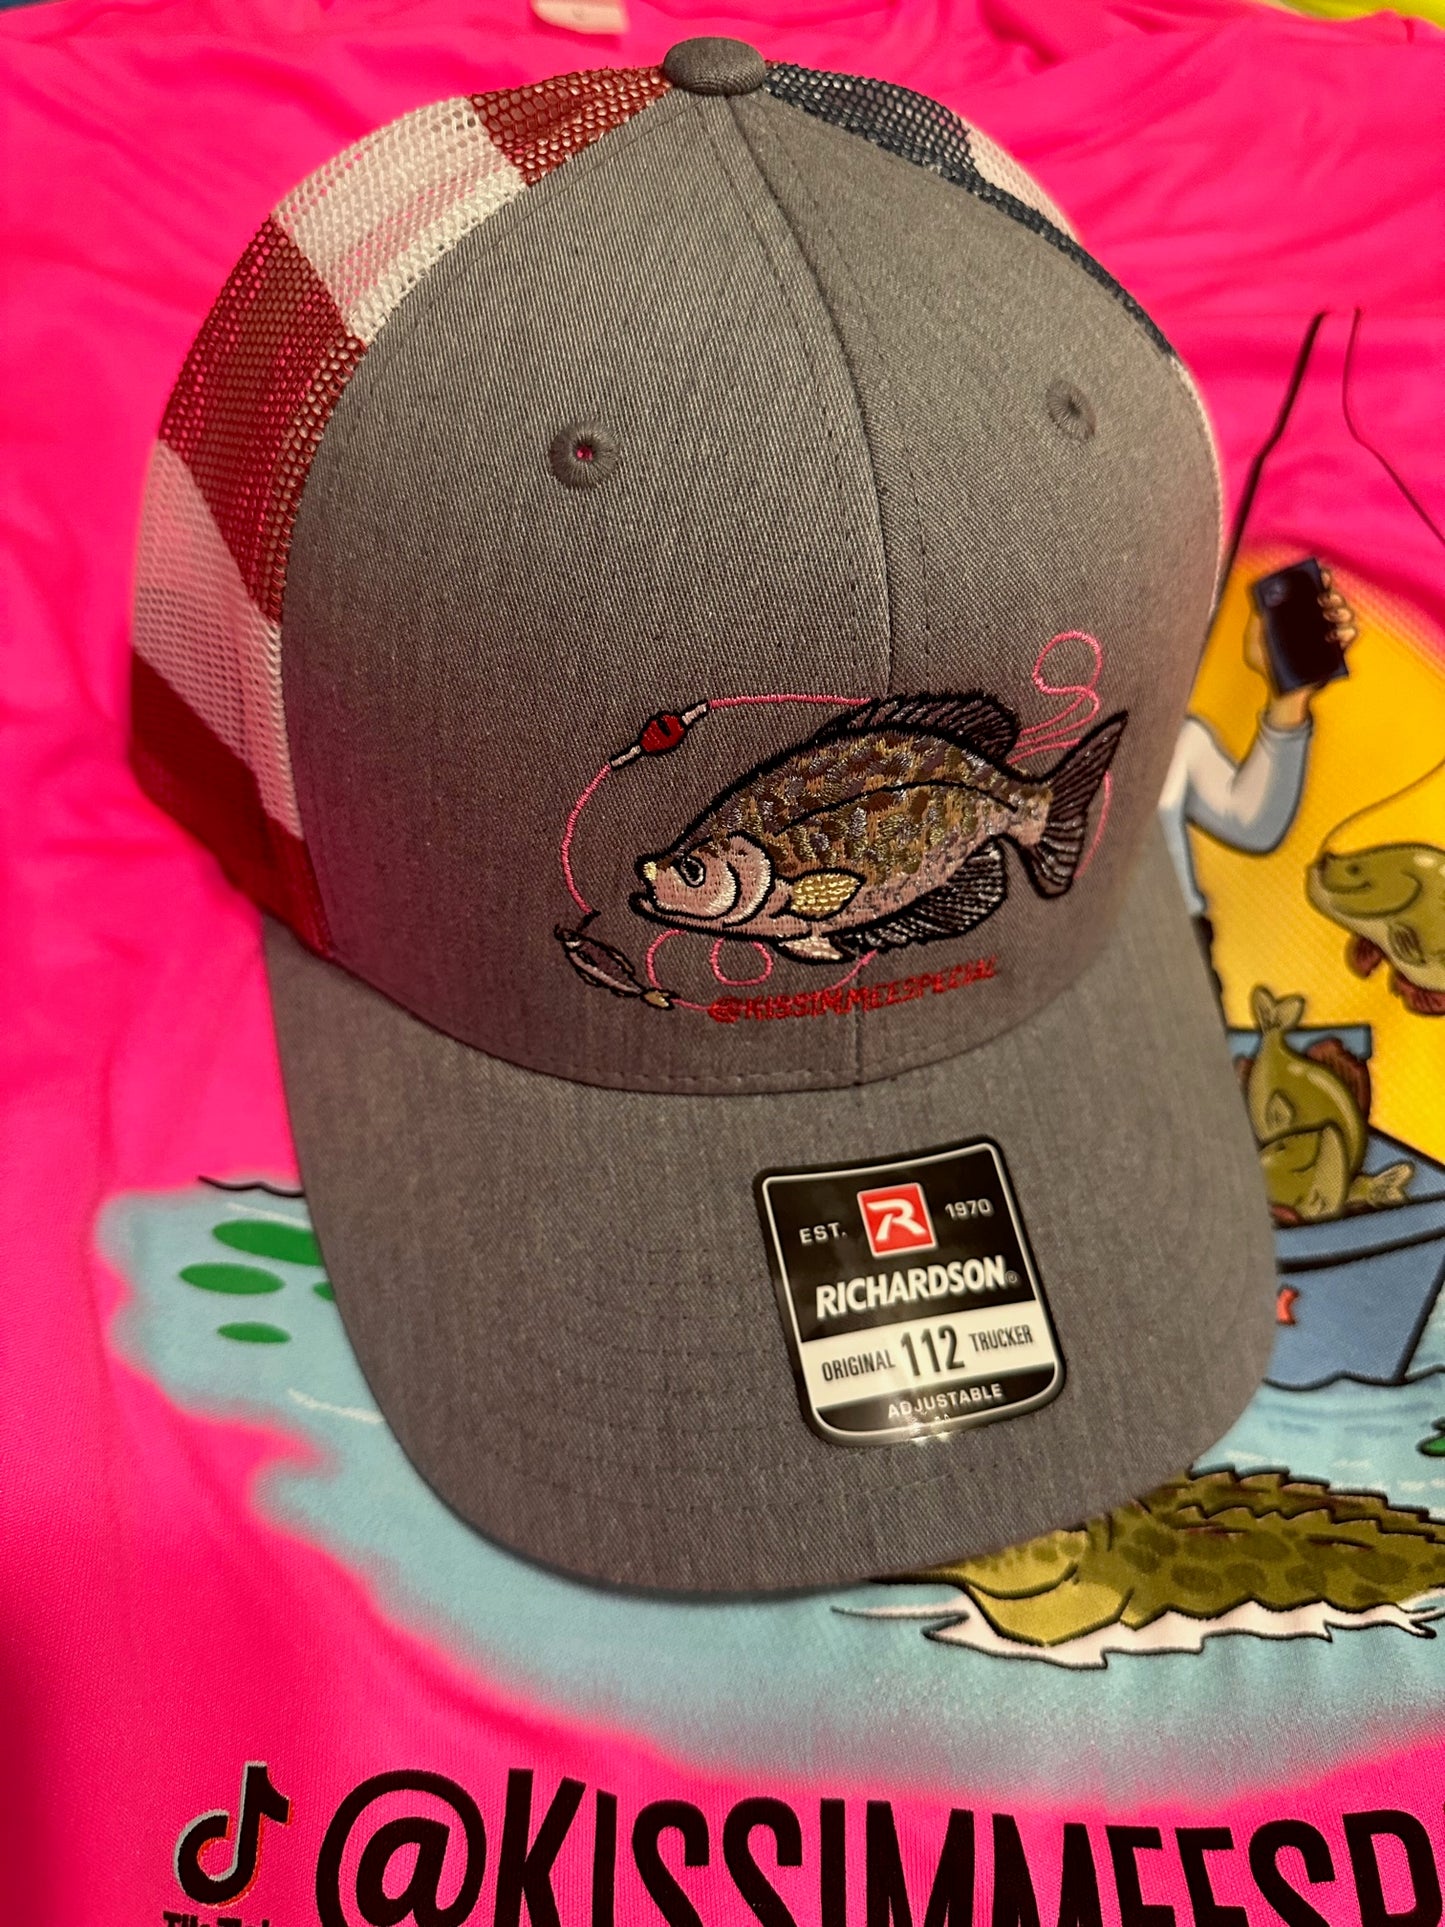 KISSIMMEESPECIAL CRAPPIE HAT